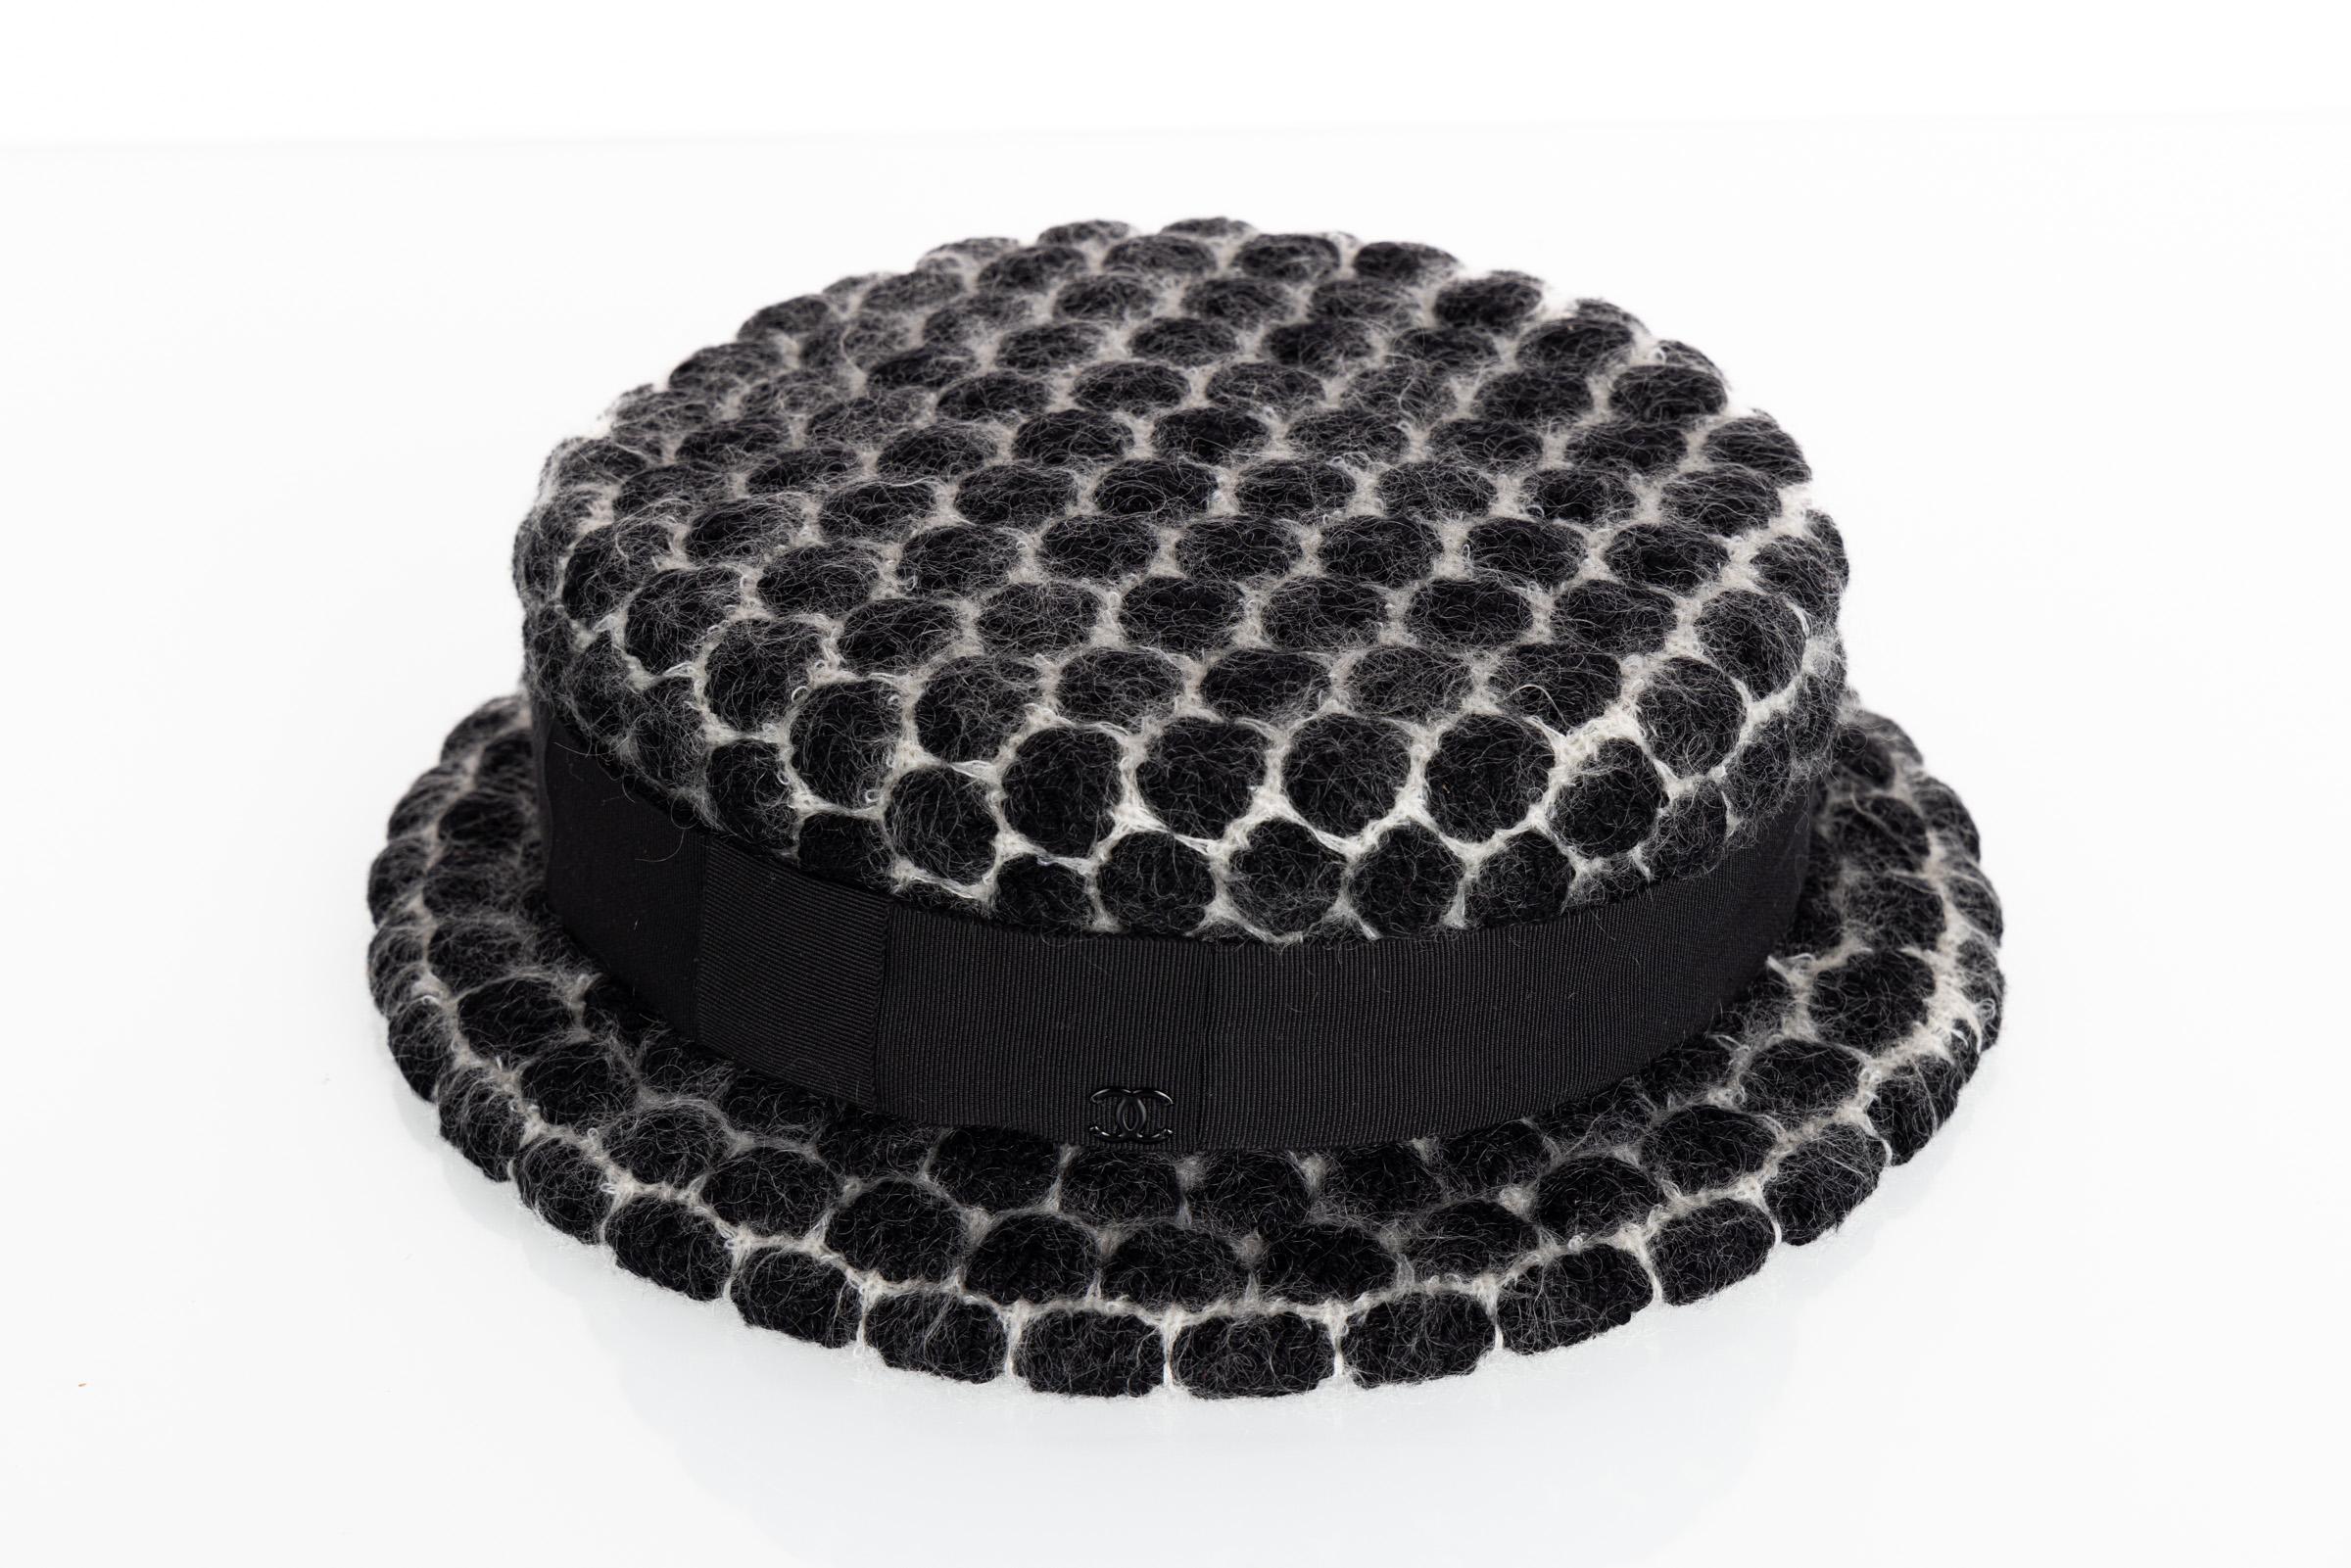 Chanel F/W 2009 Runway Black & White Mohair Bow Hat In Excellent Condition For Sale In Boca Raton, FL